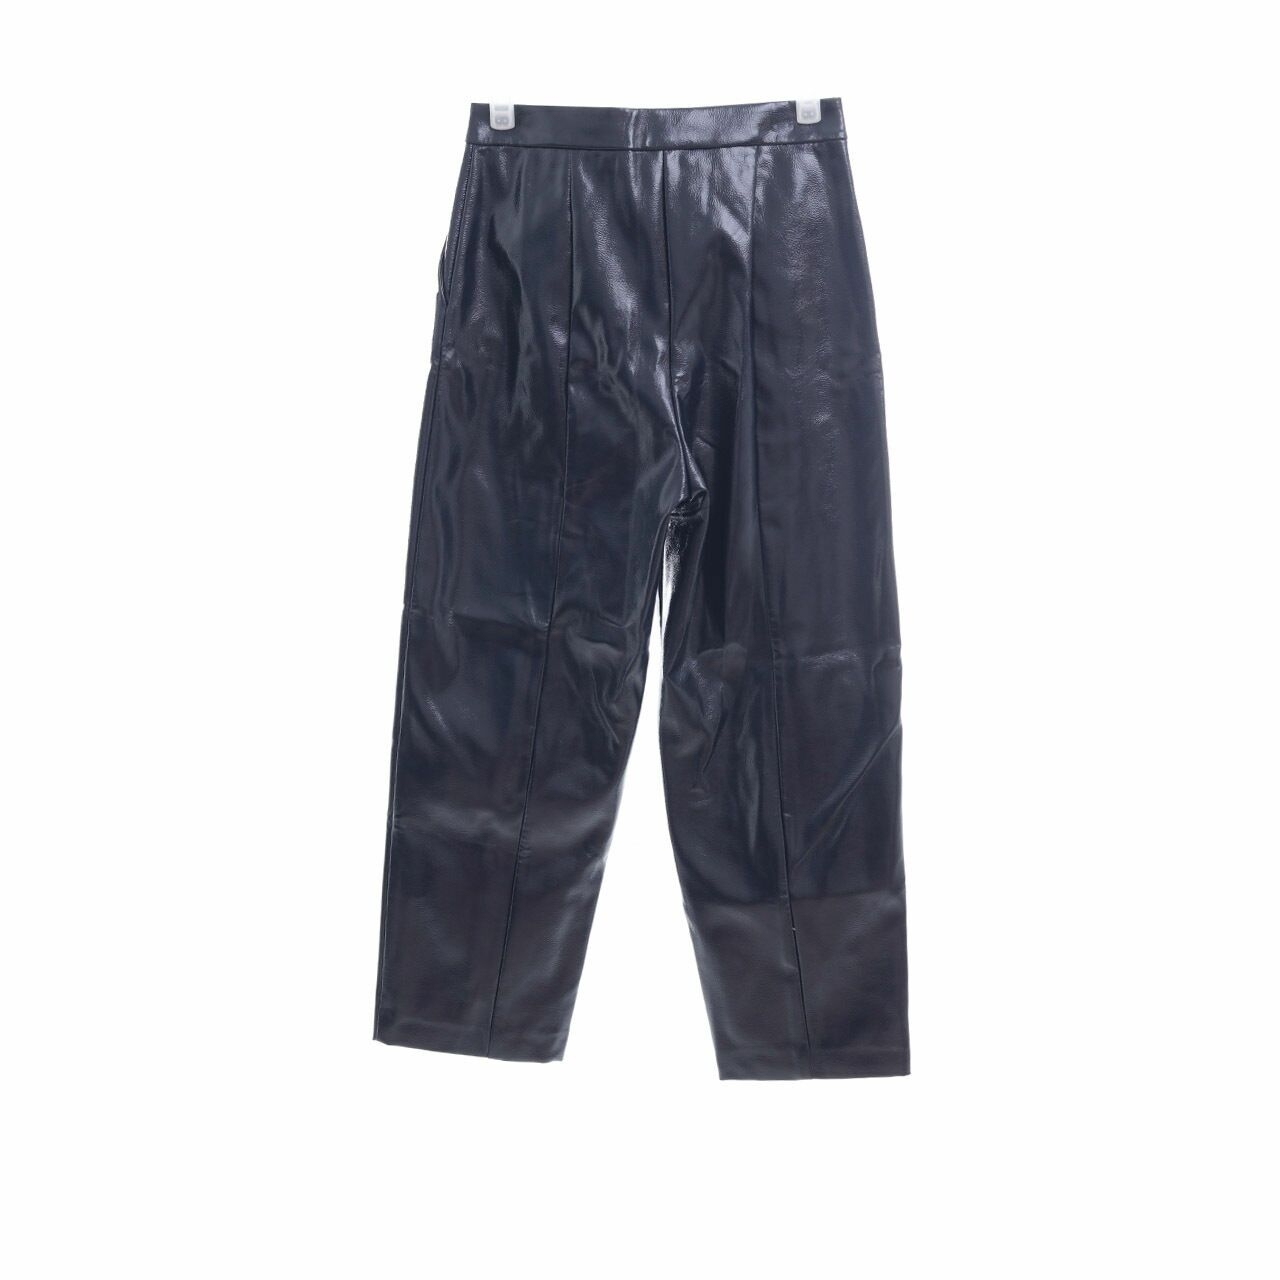 Weekday Navy Patent Leather Long Pants